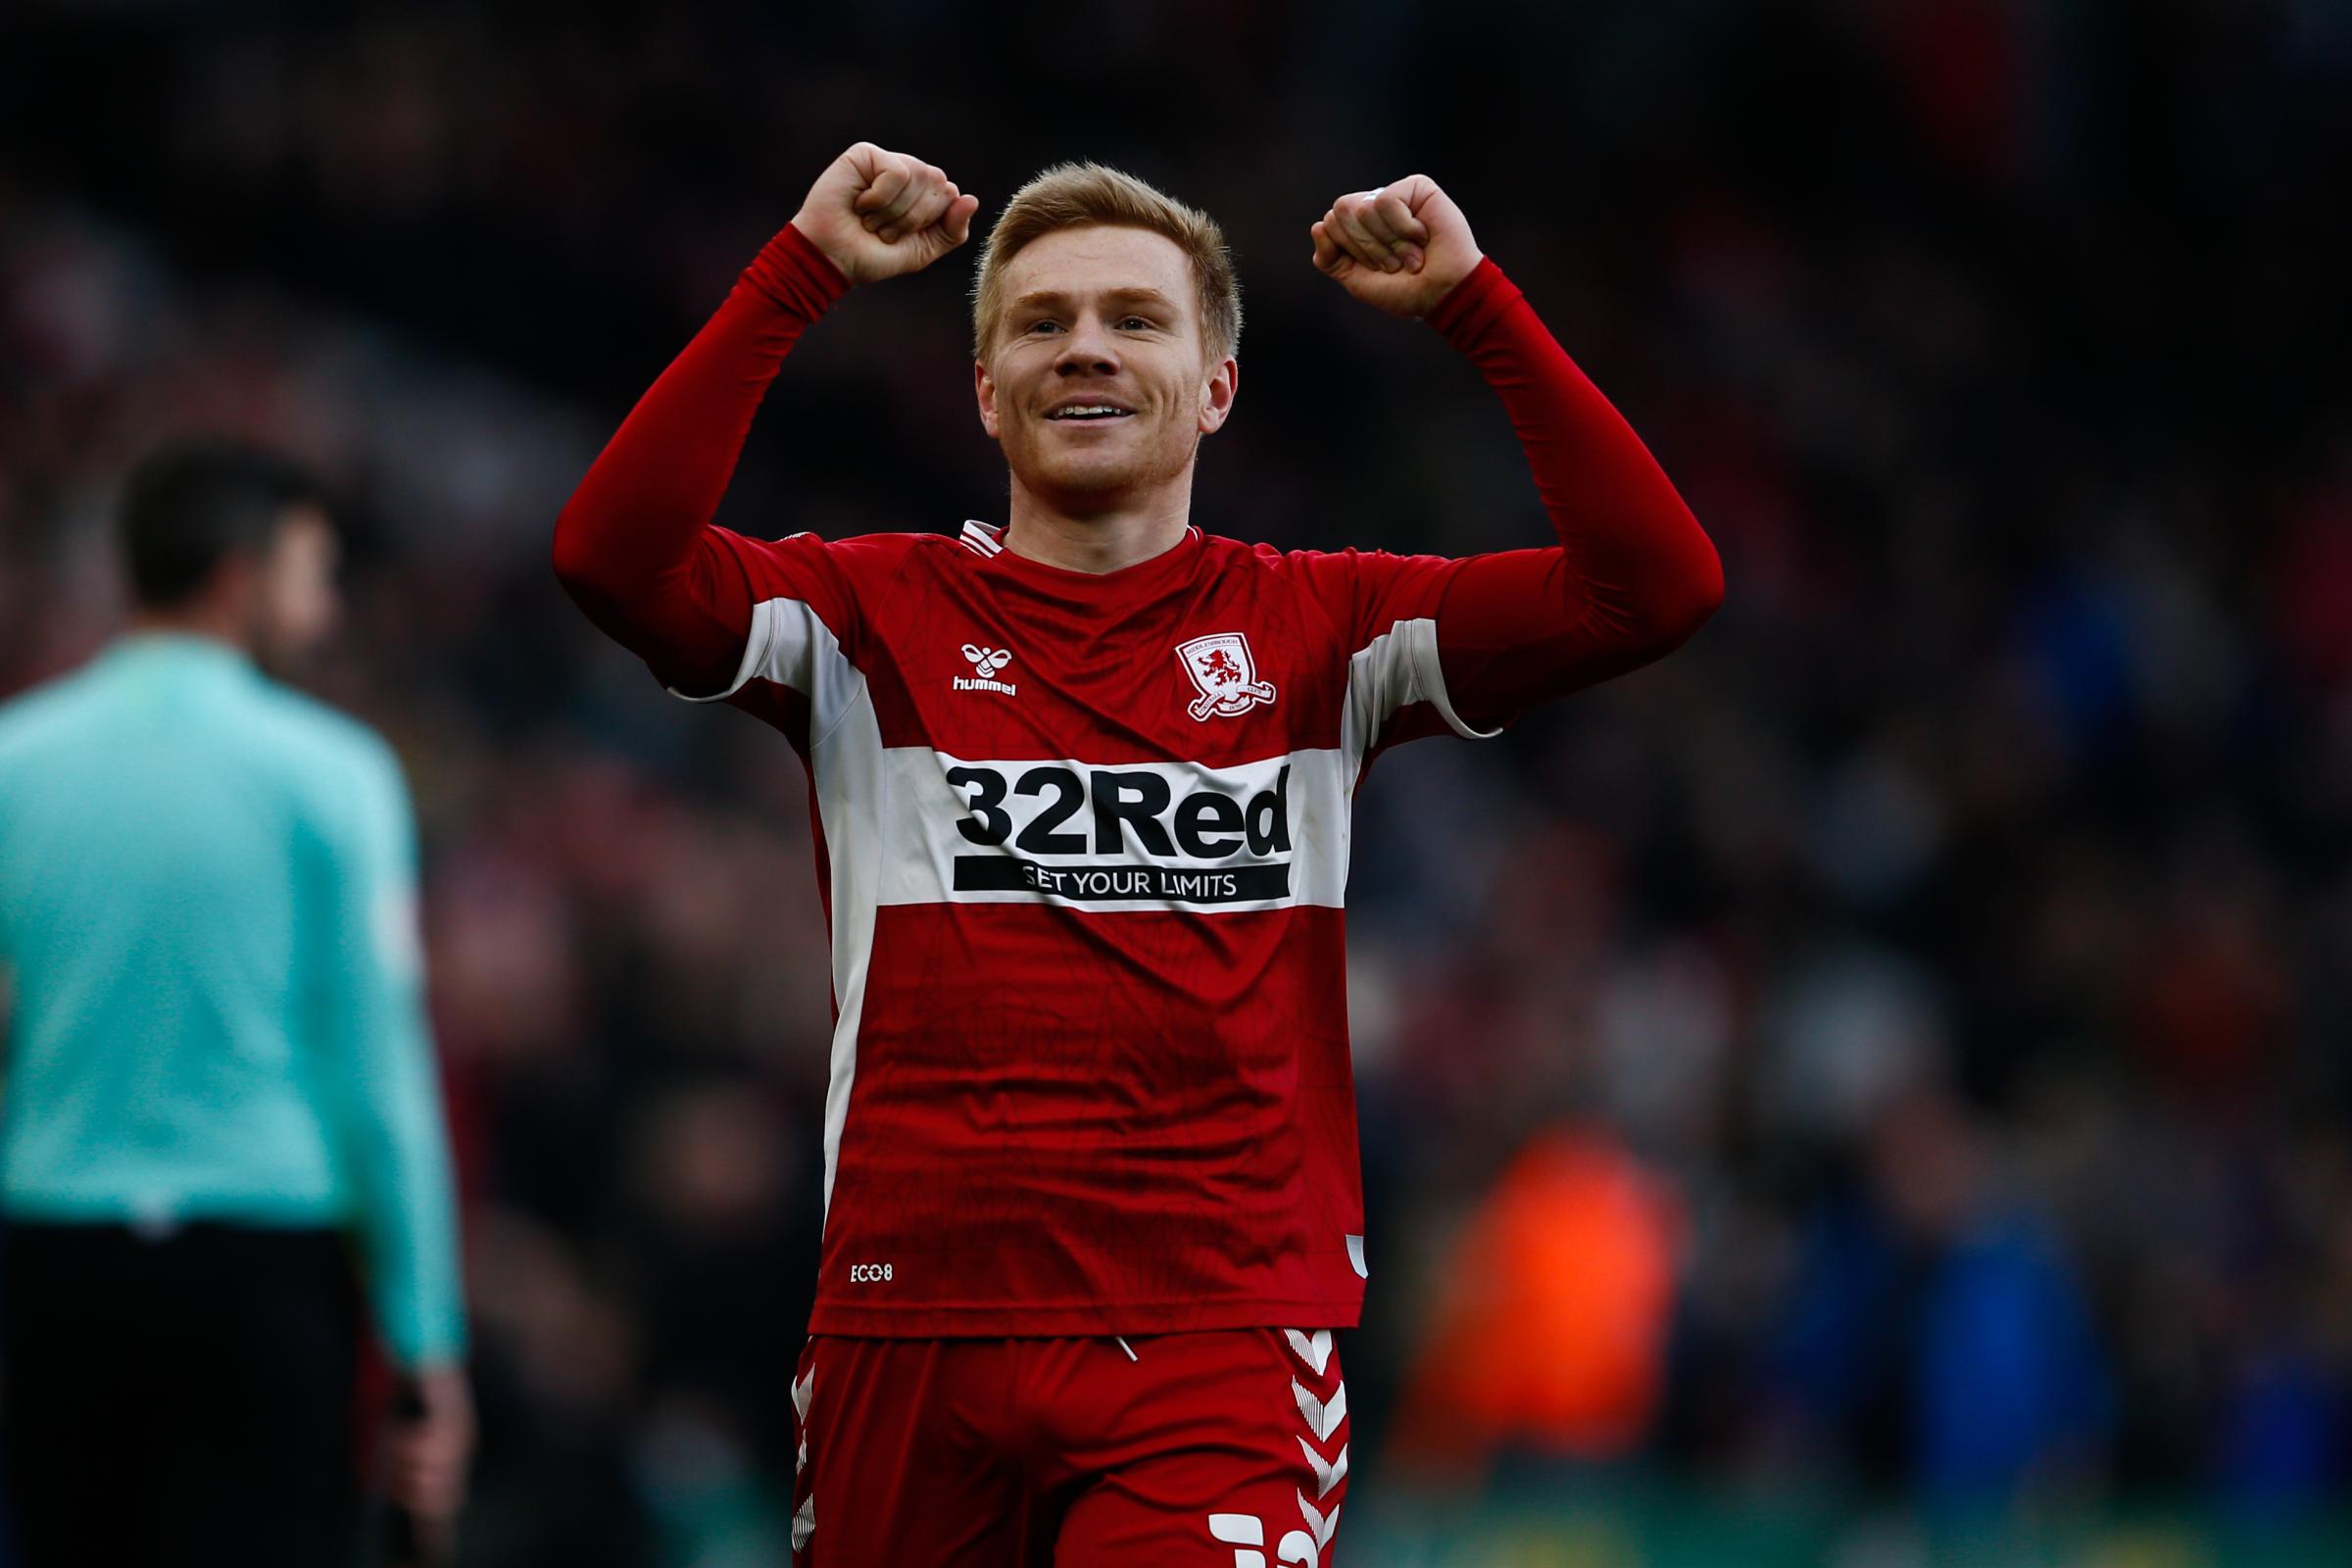 Boro are having to manage Duncan Watmore's long standing knee injury